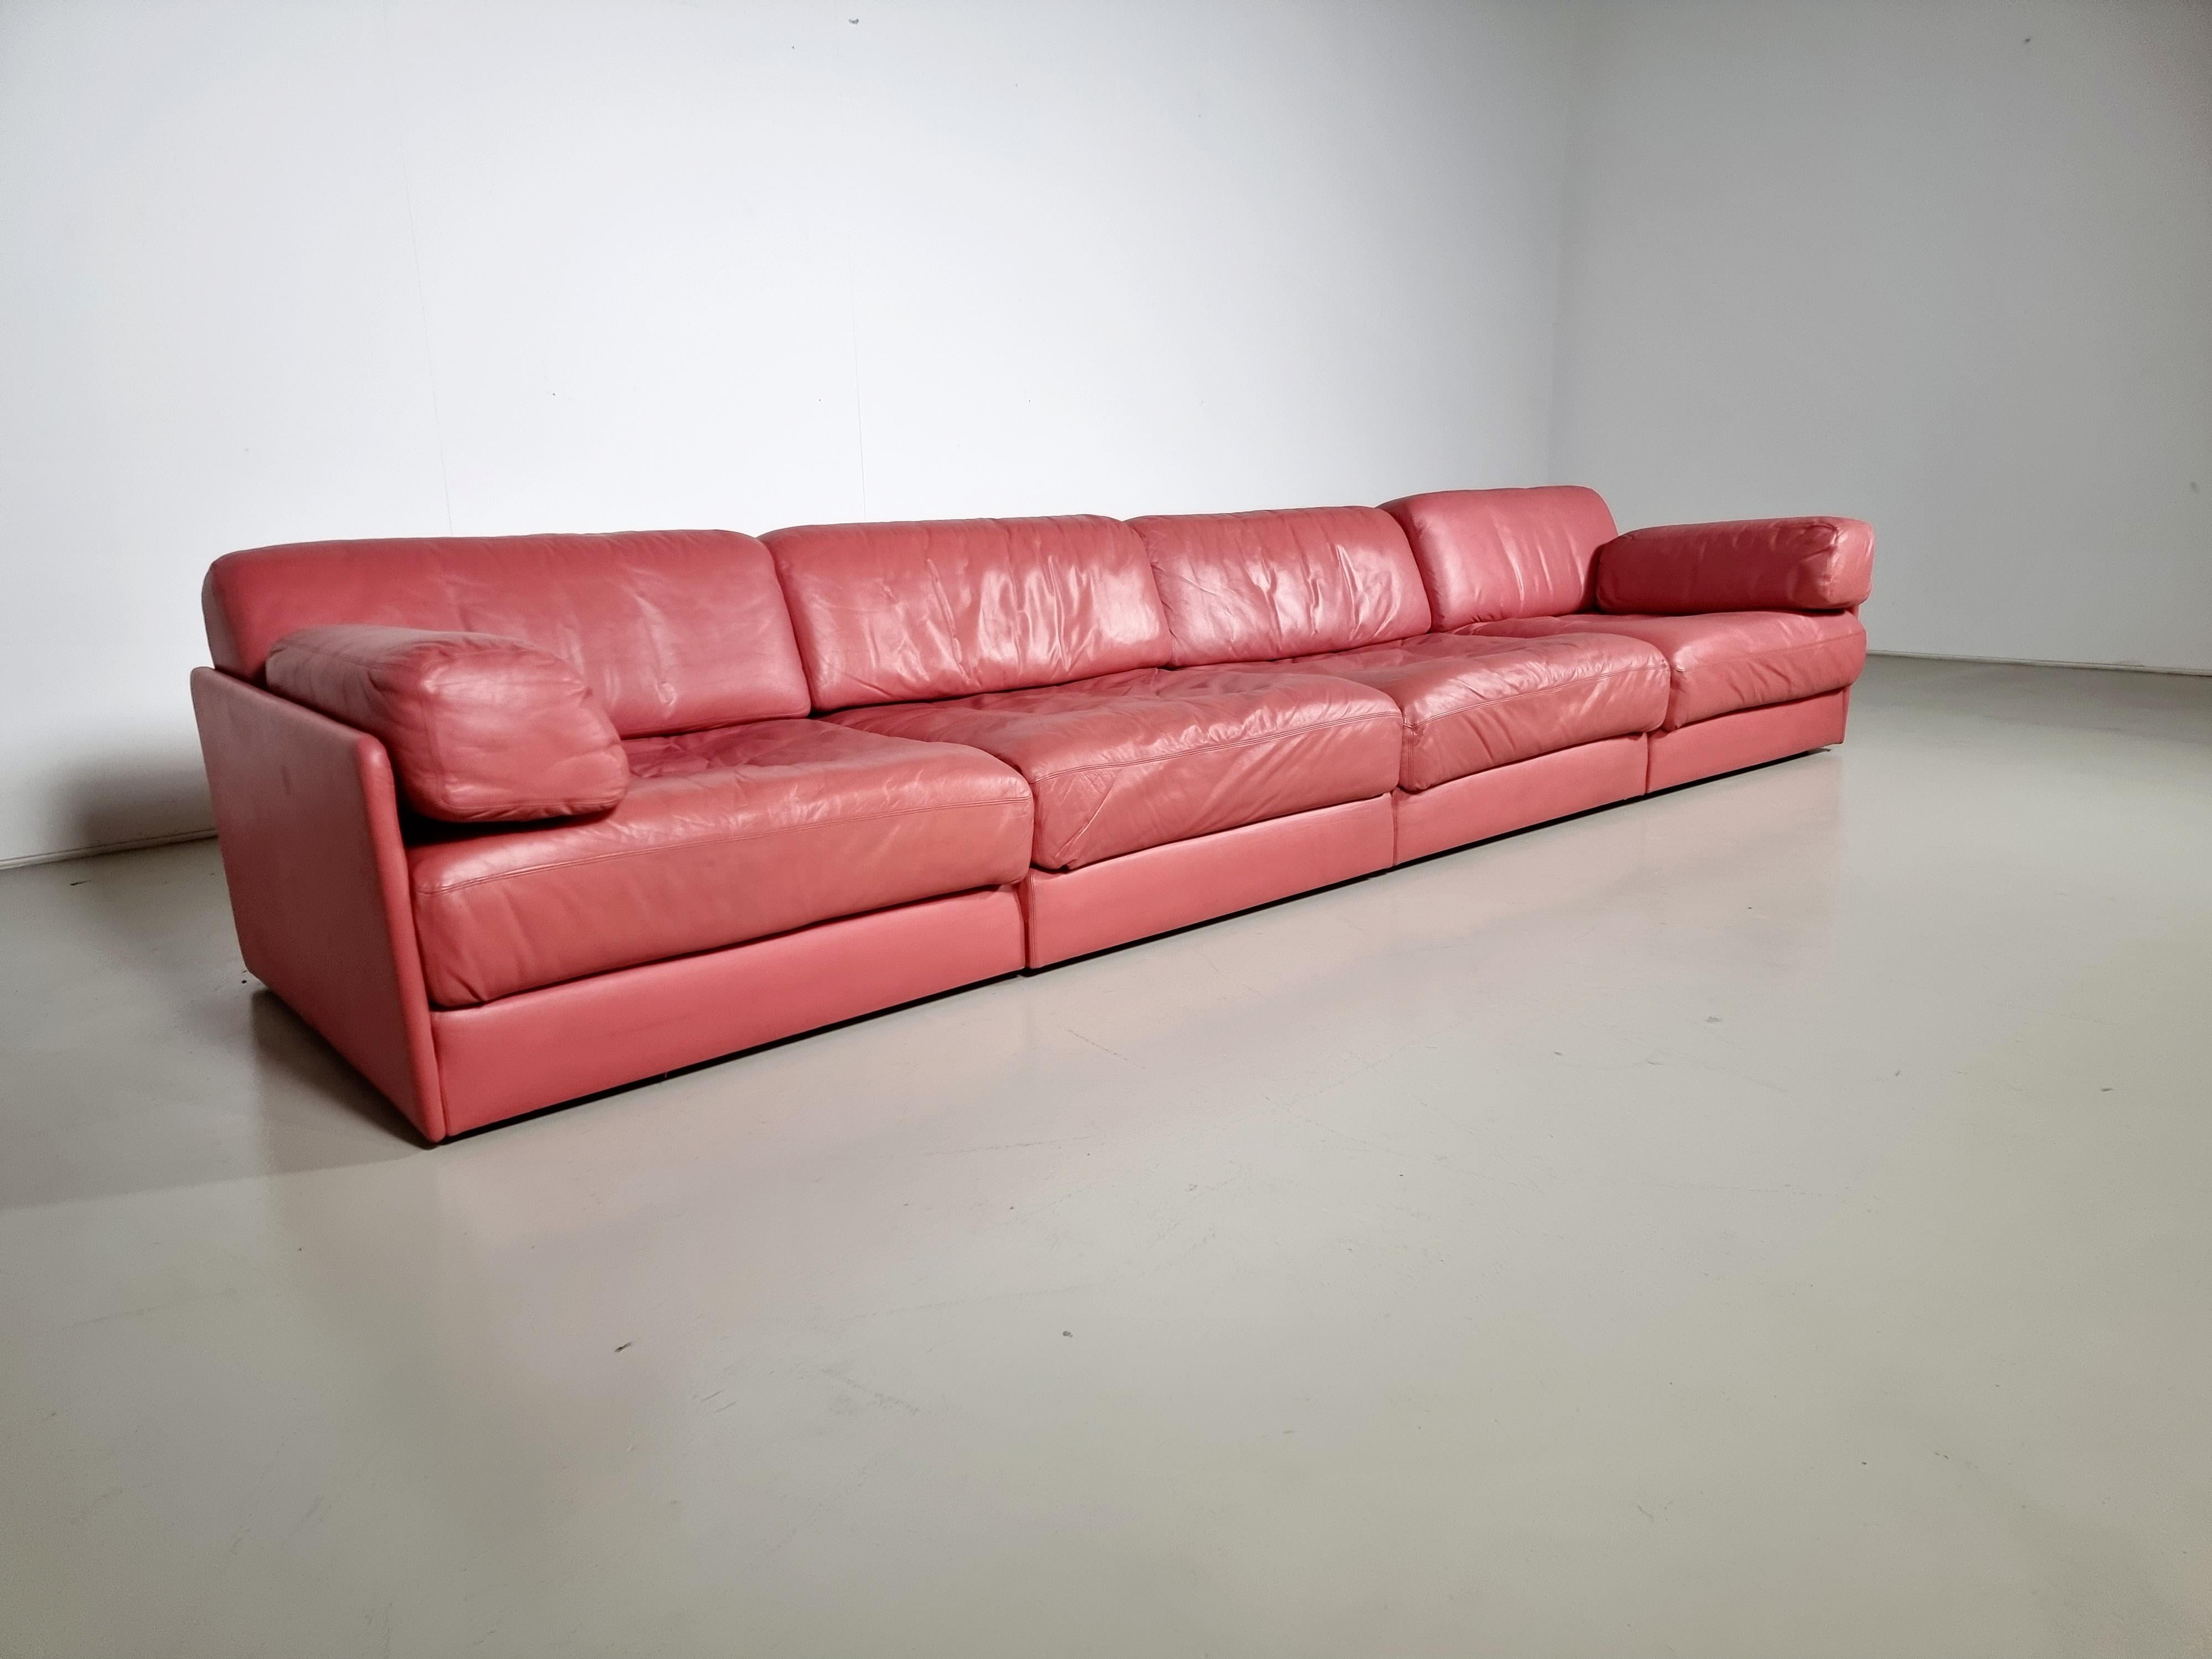 Beautiful 4-piece pink leather modular sofa by De Sede from the 1970s. The sofa can be converted into a guest bed in just a few simple steps. Extremely comfortable with a nice patina. Different settings are possible as shown in the pictures. The